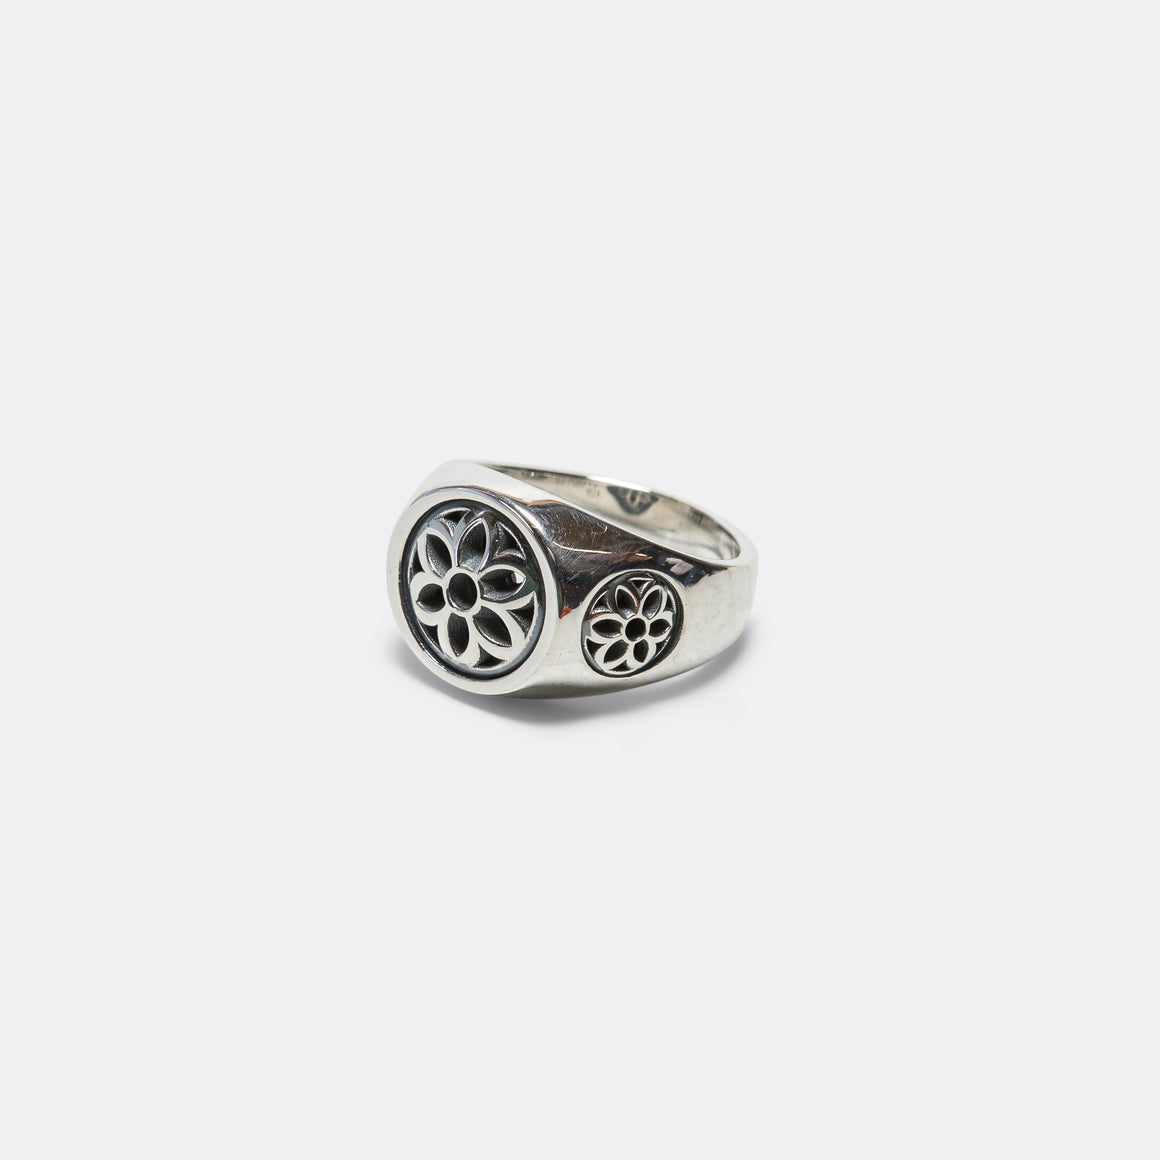 Good Art Hlywd - Club Ring Small - 925 Silver - UP THERE